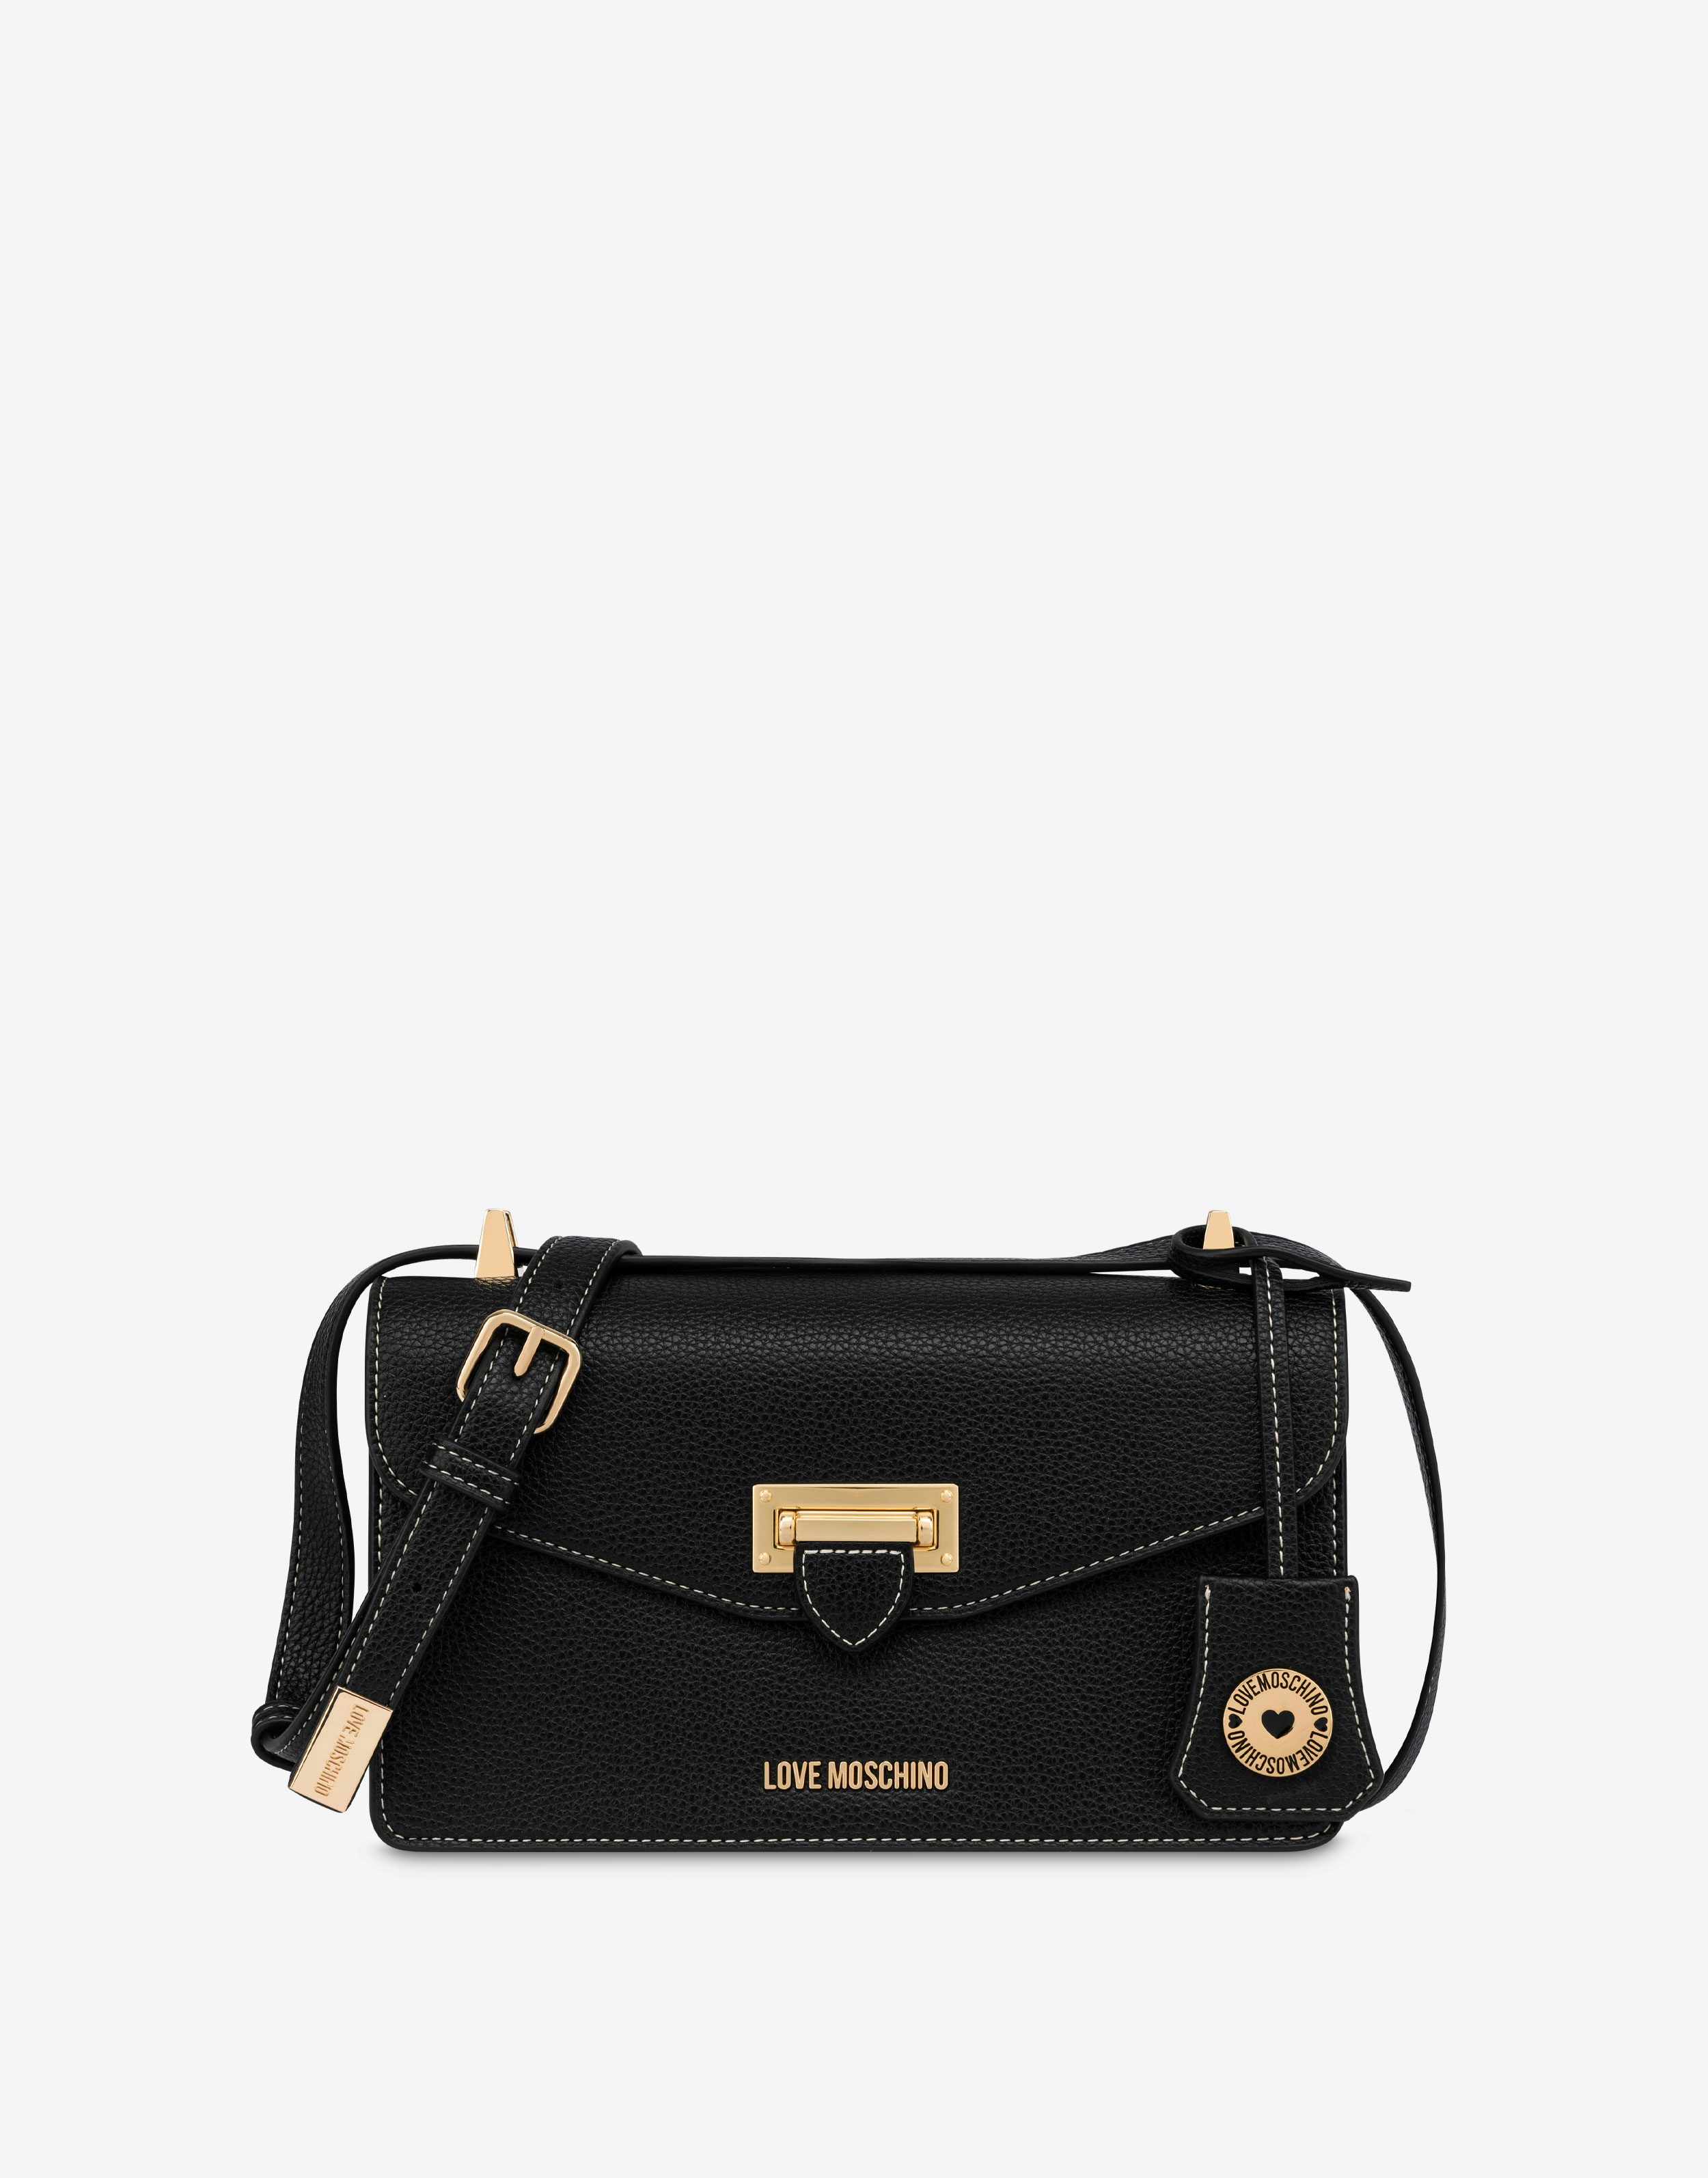 Love Moschino for Women - Official Store in the United States